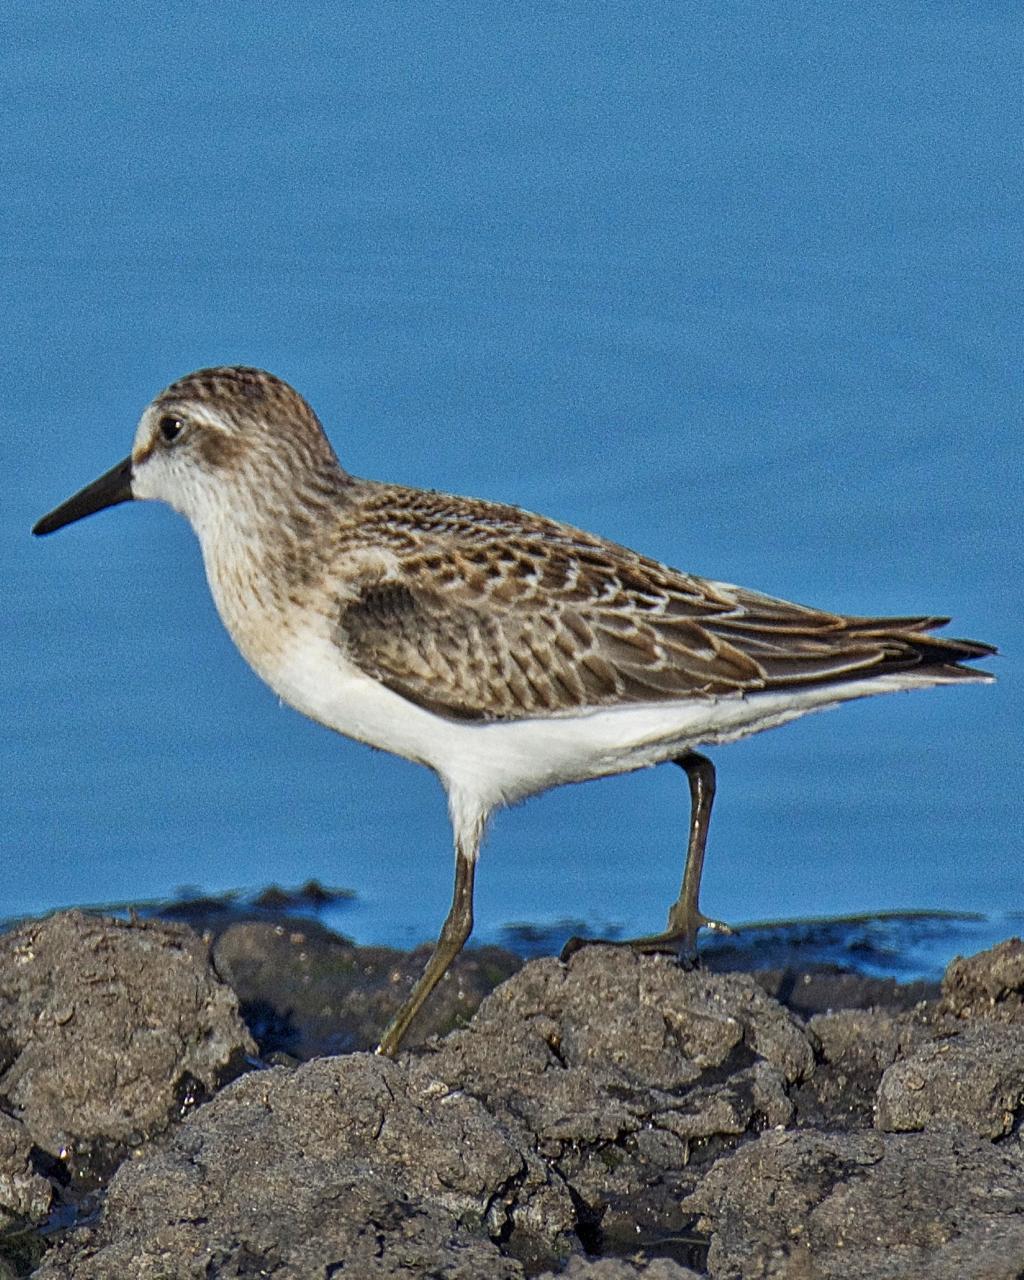 Semipalmated Sandpiper Photo by Brian Avent